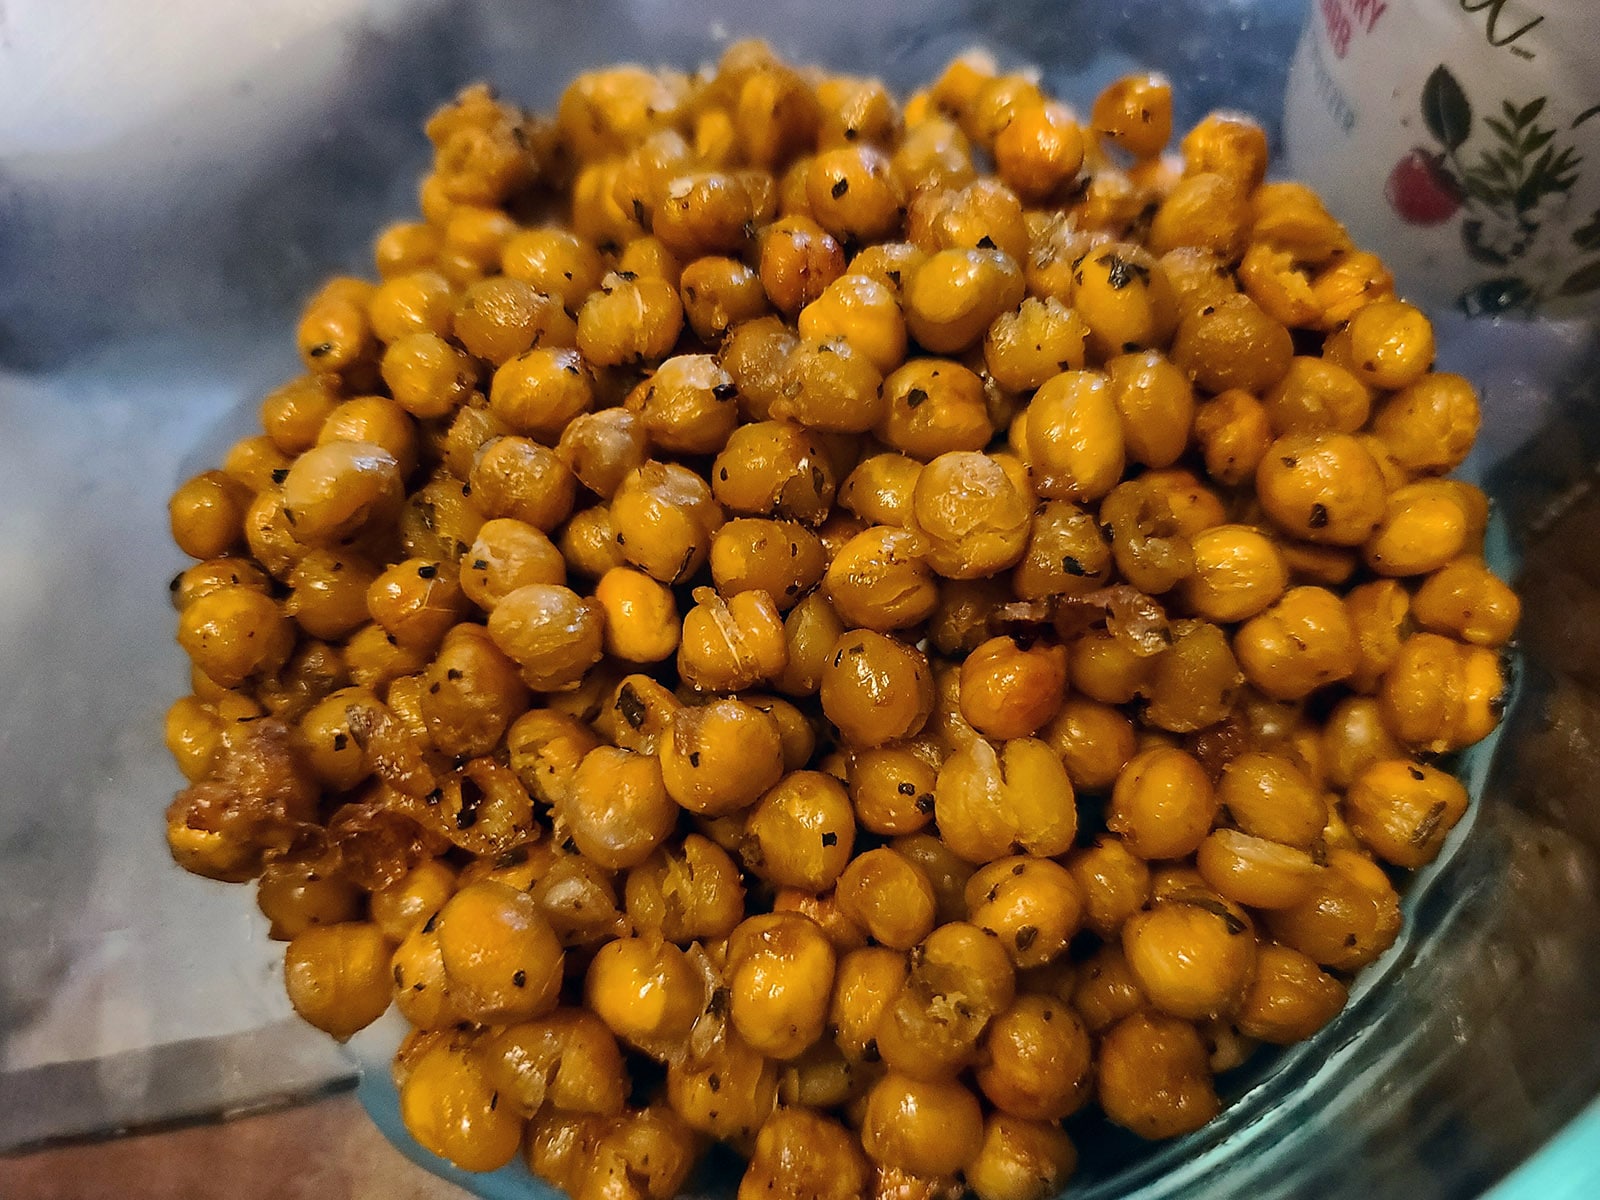 A close up view of a bowl of crunchy roasted chickpeas.